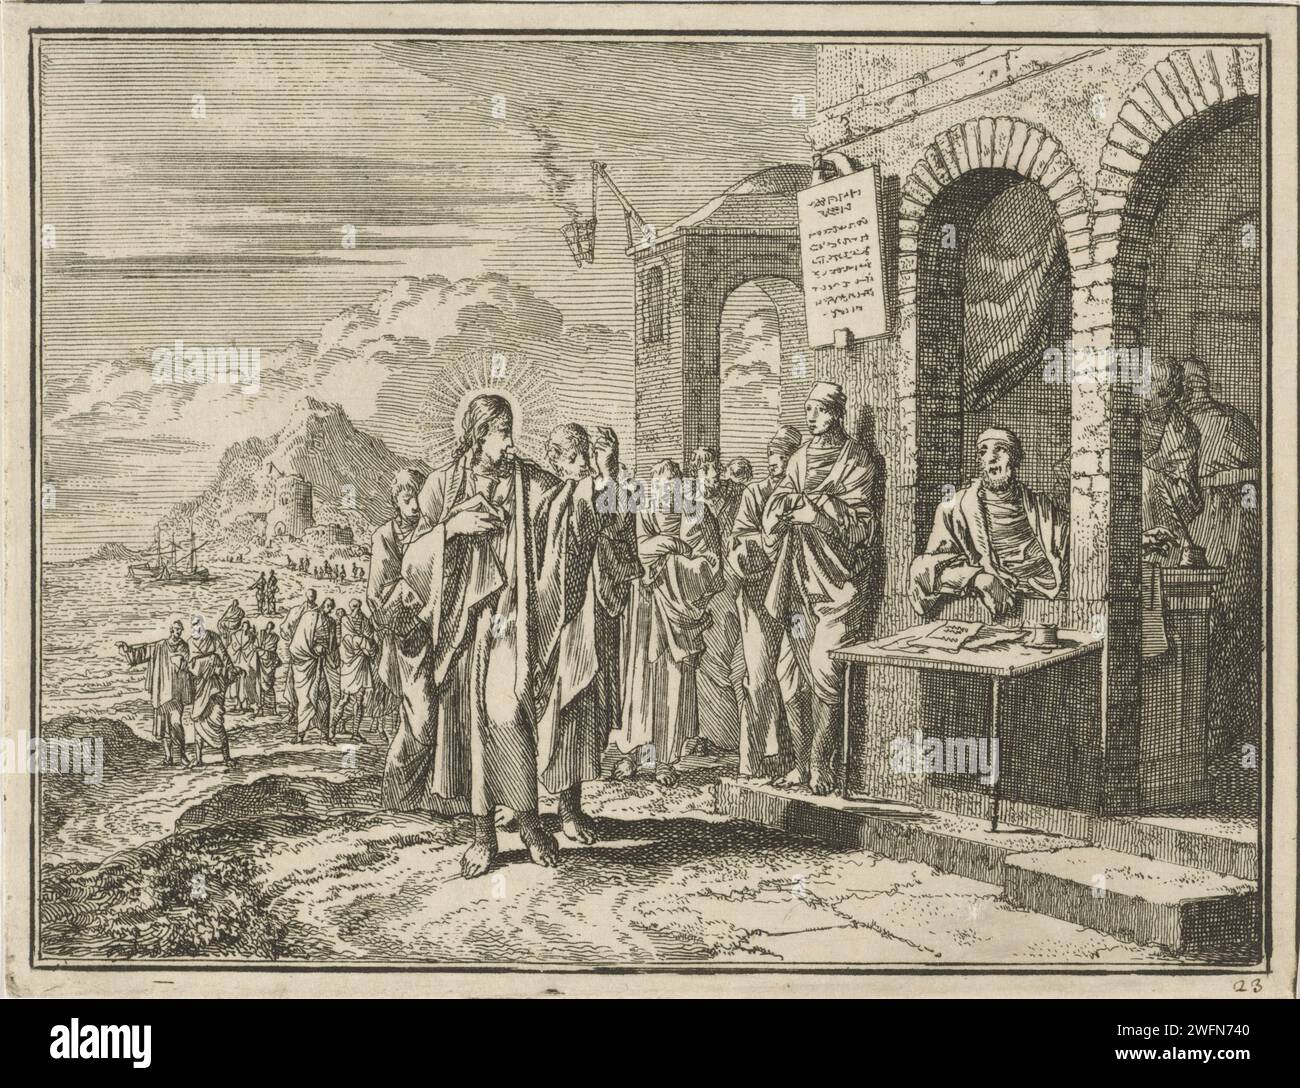 Calling of Mattheus, Jan Luyken, 1712 print  Amsterdam paper etching calling of Matthew (Levi), the tax-collector (usually with money lying on the table and people paying taxes) (Matthew 9:9; Mark 2:14; Luke 5:27-28) Stock Photo